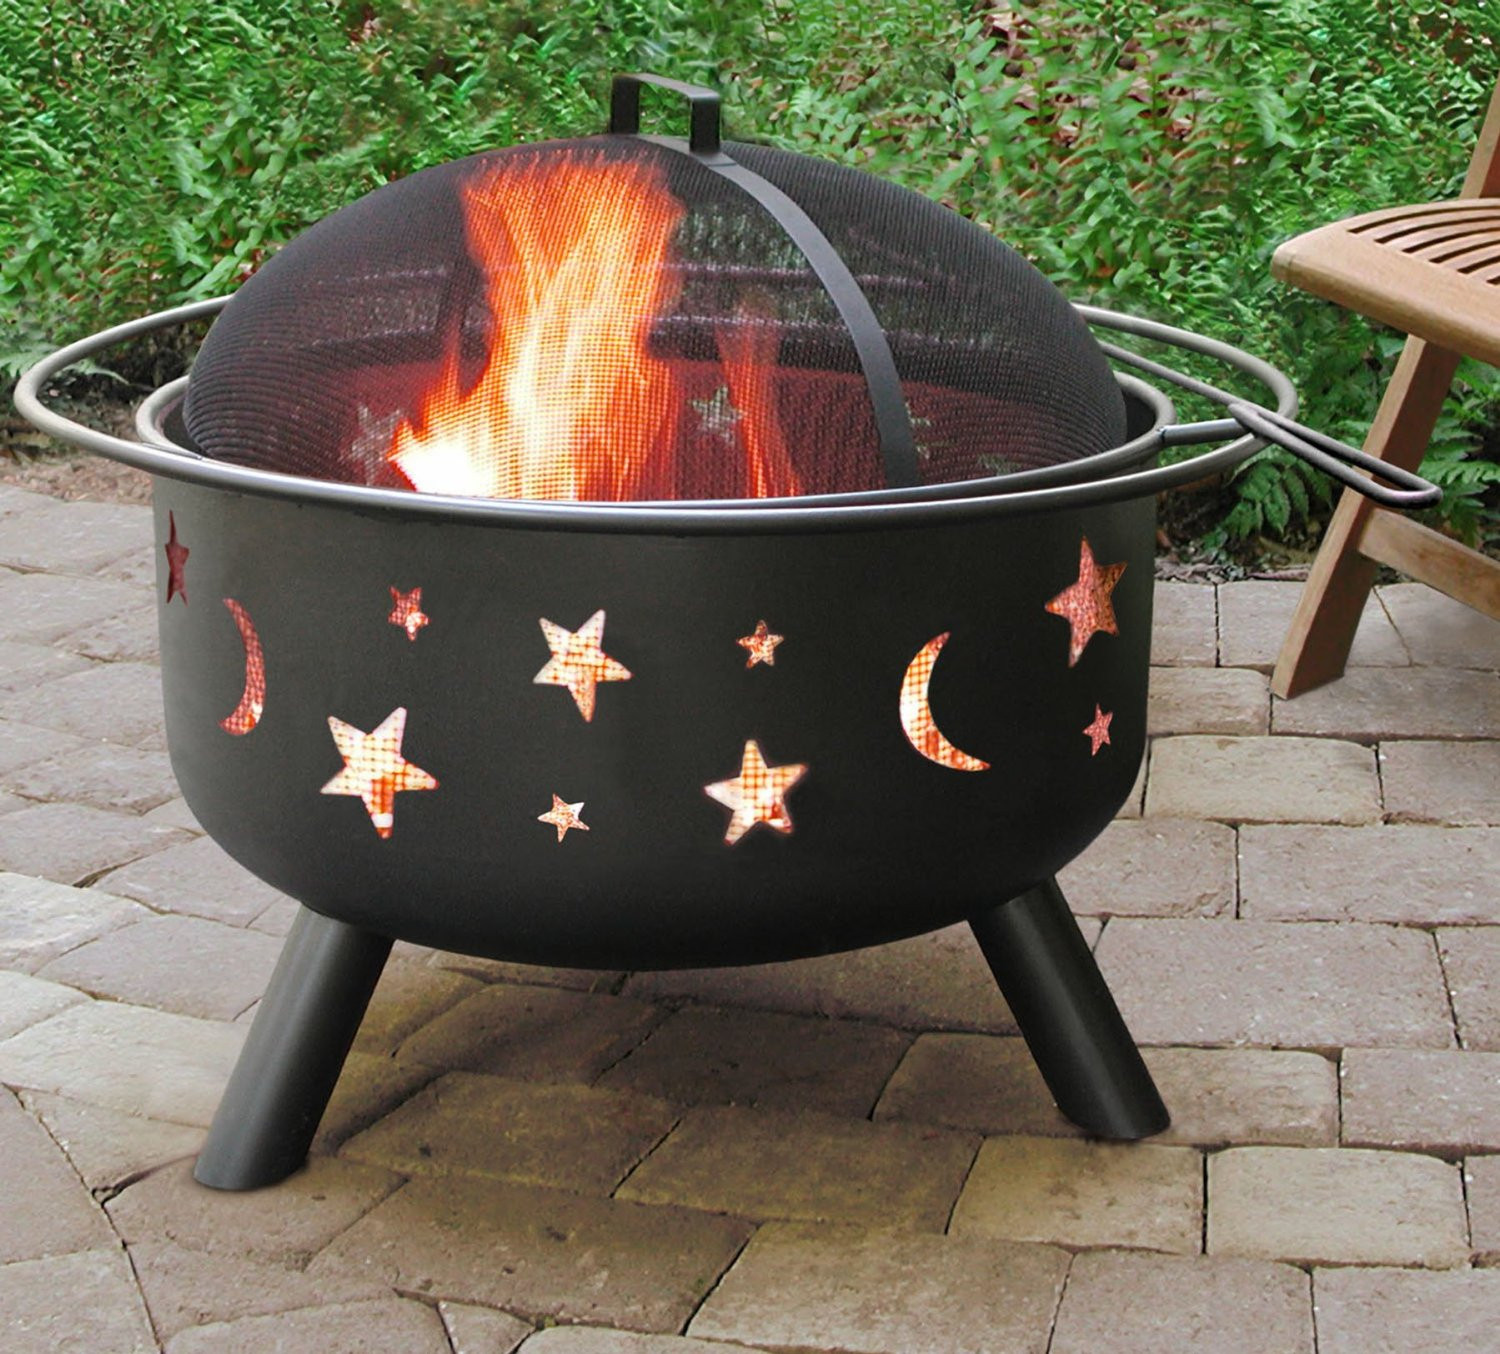 Outdoor Fireplace Or Fire Pit
 Fire Pit Star Moon Glow Outdoor Fireplace Backyard Wood